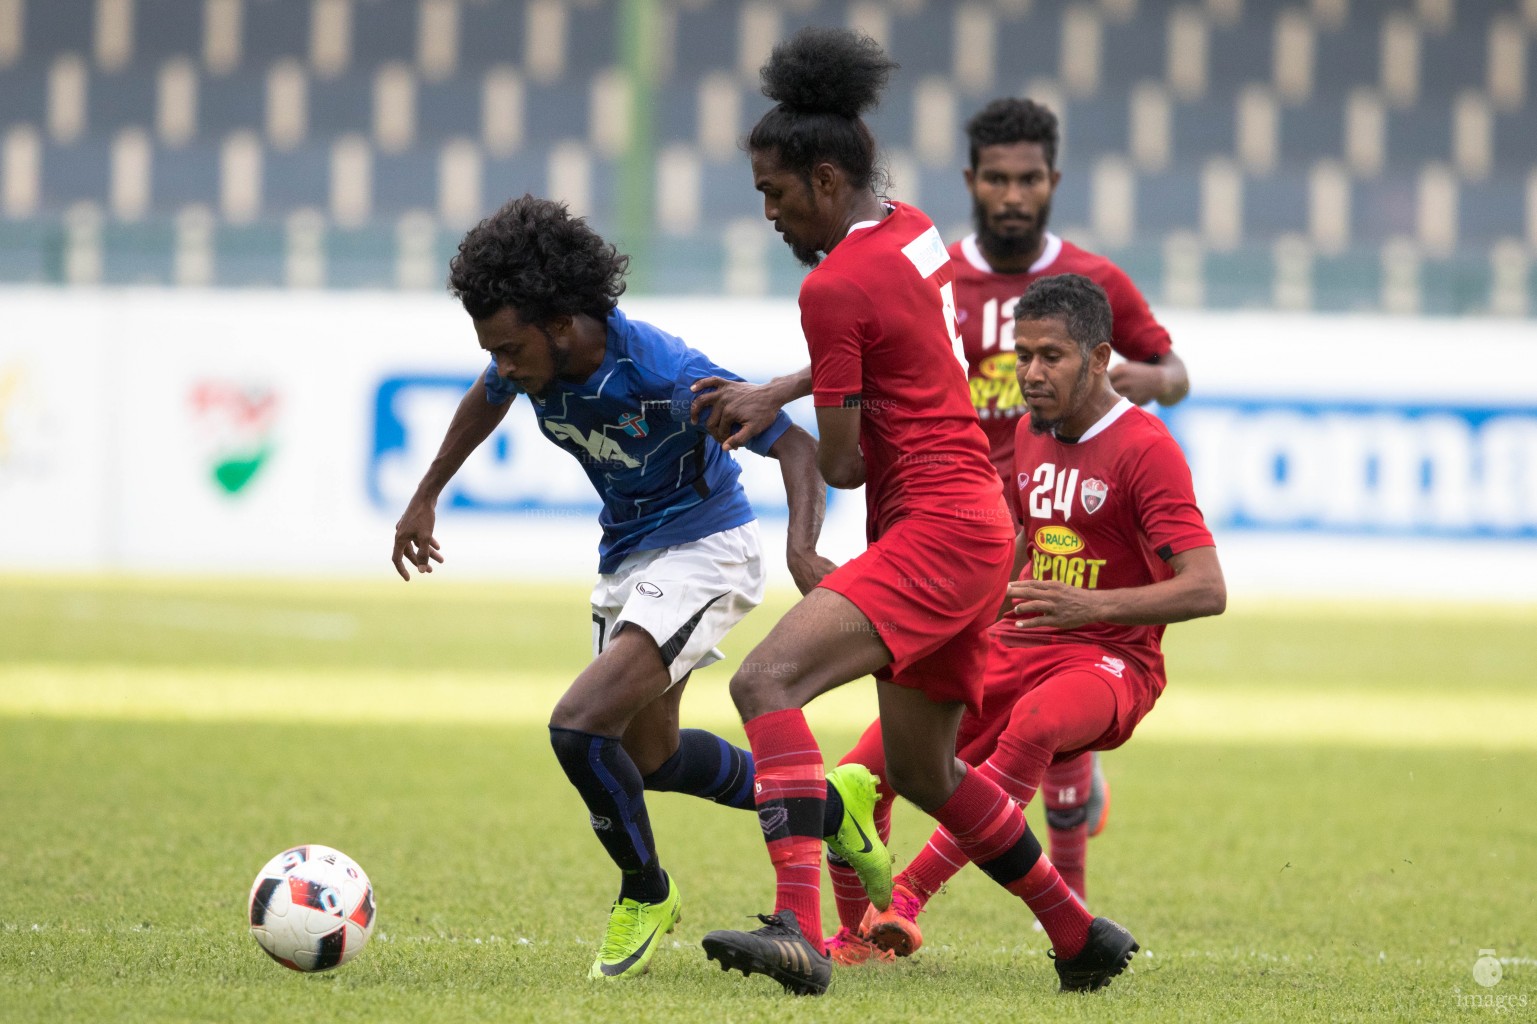 Ooredoo Dhivehi Premier League 2017, TC Sports Club vs Thinadhoo FT in Male , Maldives. Saturday, October . 14, 2017. ( Images.mv Photo : Abdulla Abeedh )